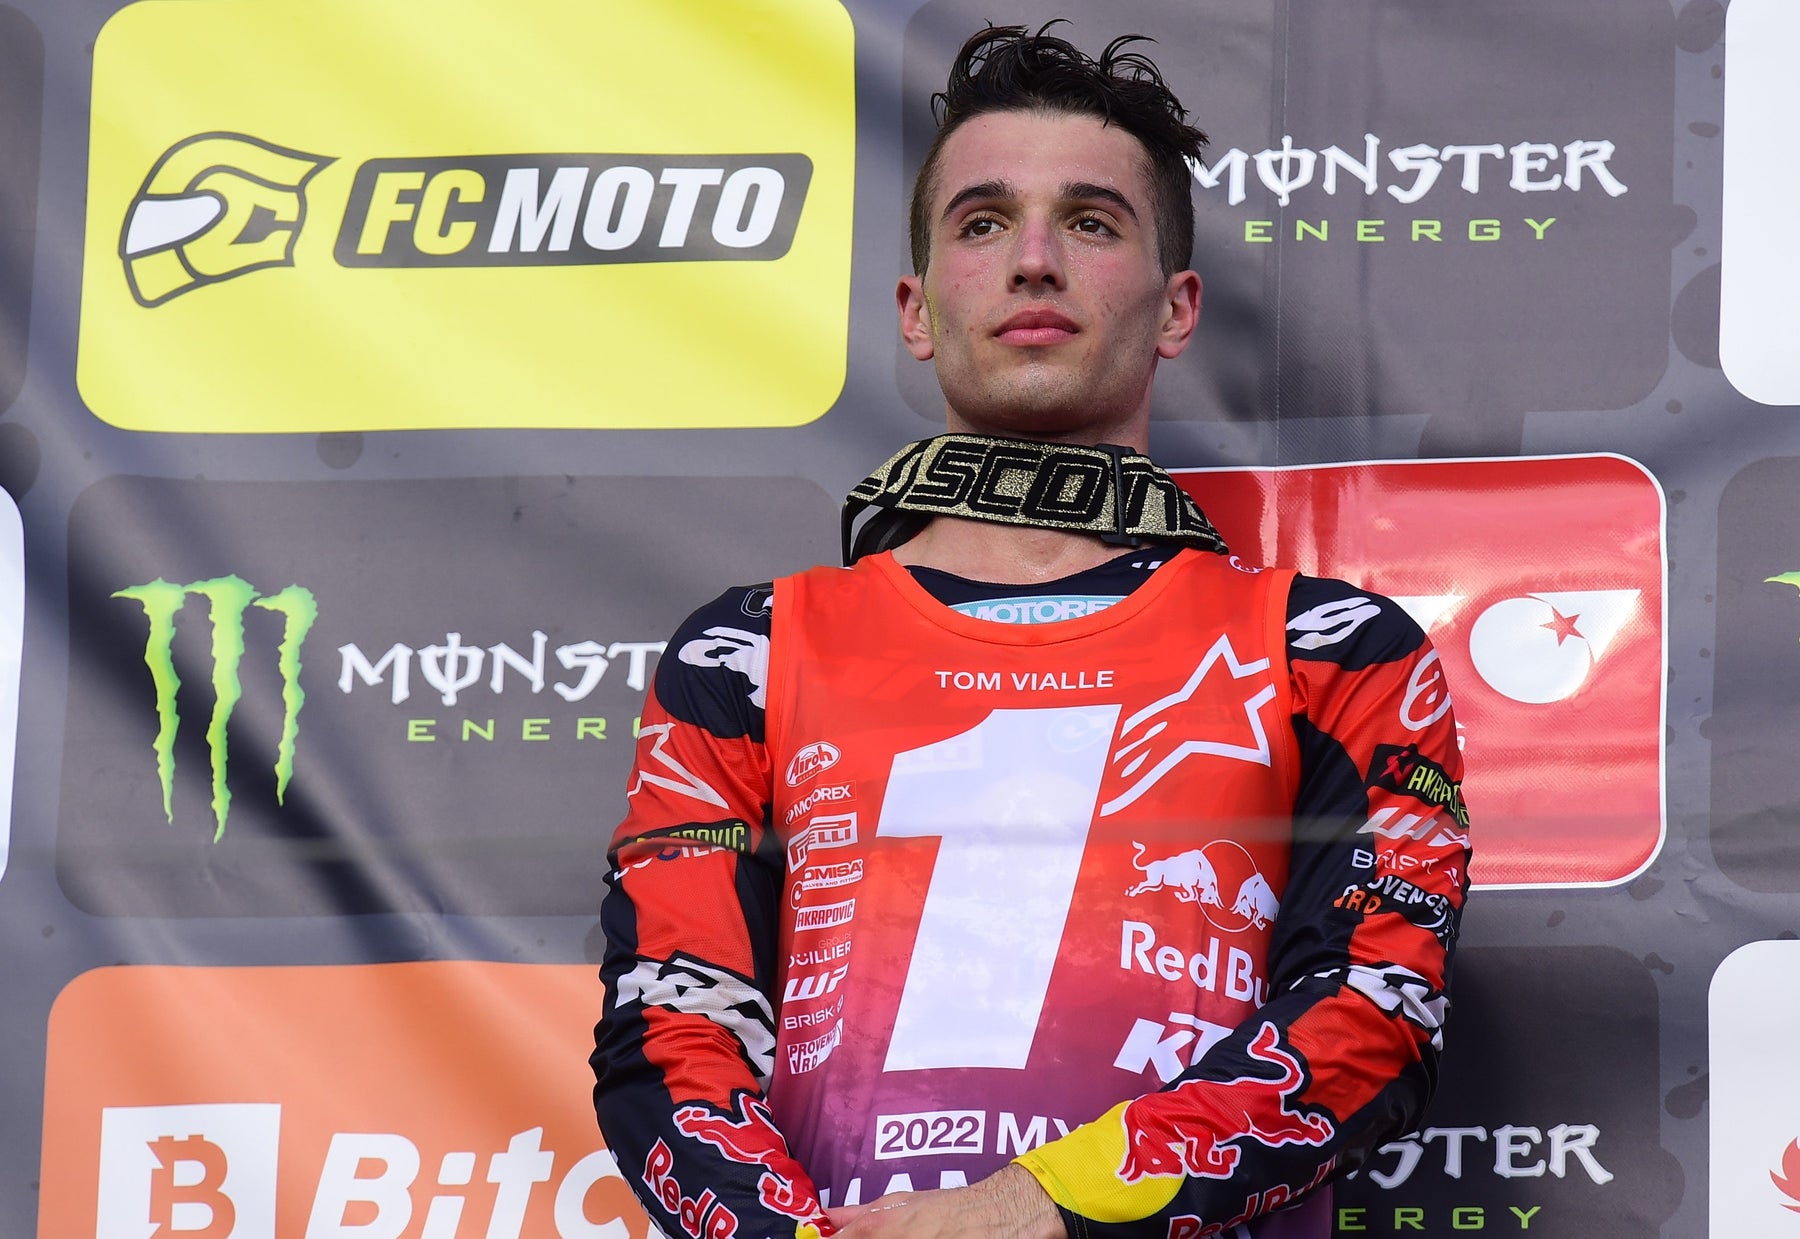 TOM VIALLE SAVES HIS BEST FOR LAST AS HE GOES 1-1 TO WIN THE OVERALL AND BECOME 2022 MX2 WORLD CHAMPION AT THE FINAL ROUND OF THE SEASON IN TURKEY